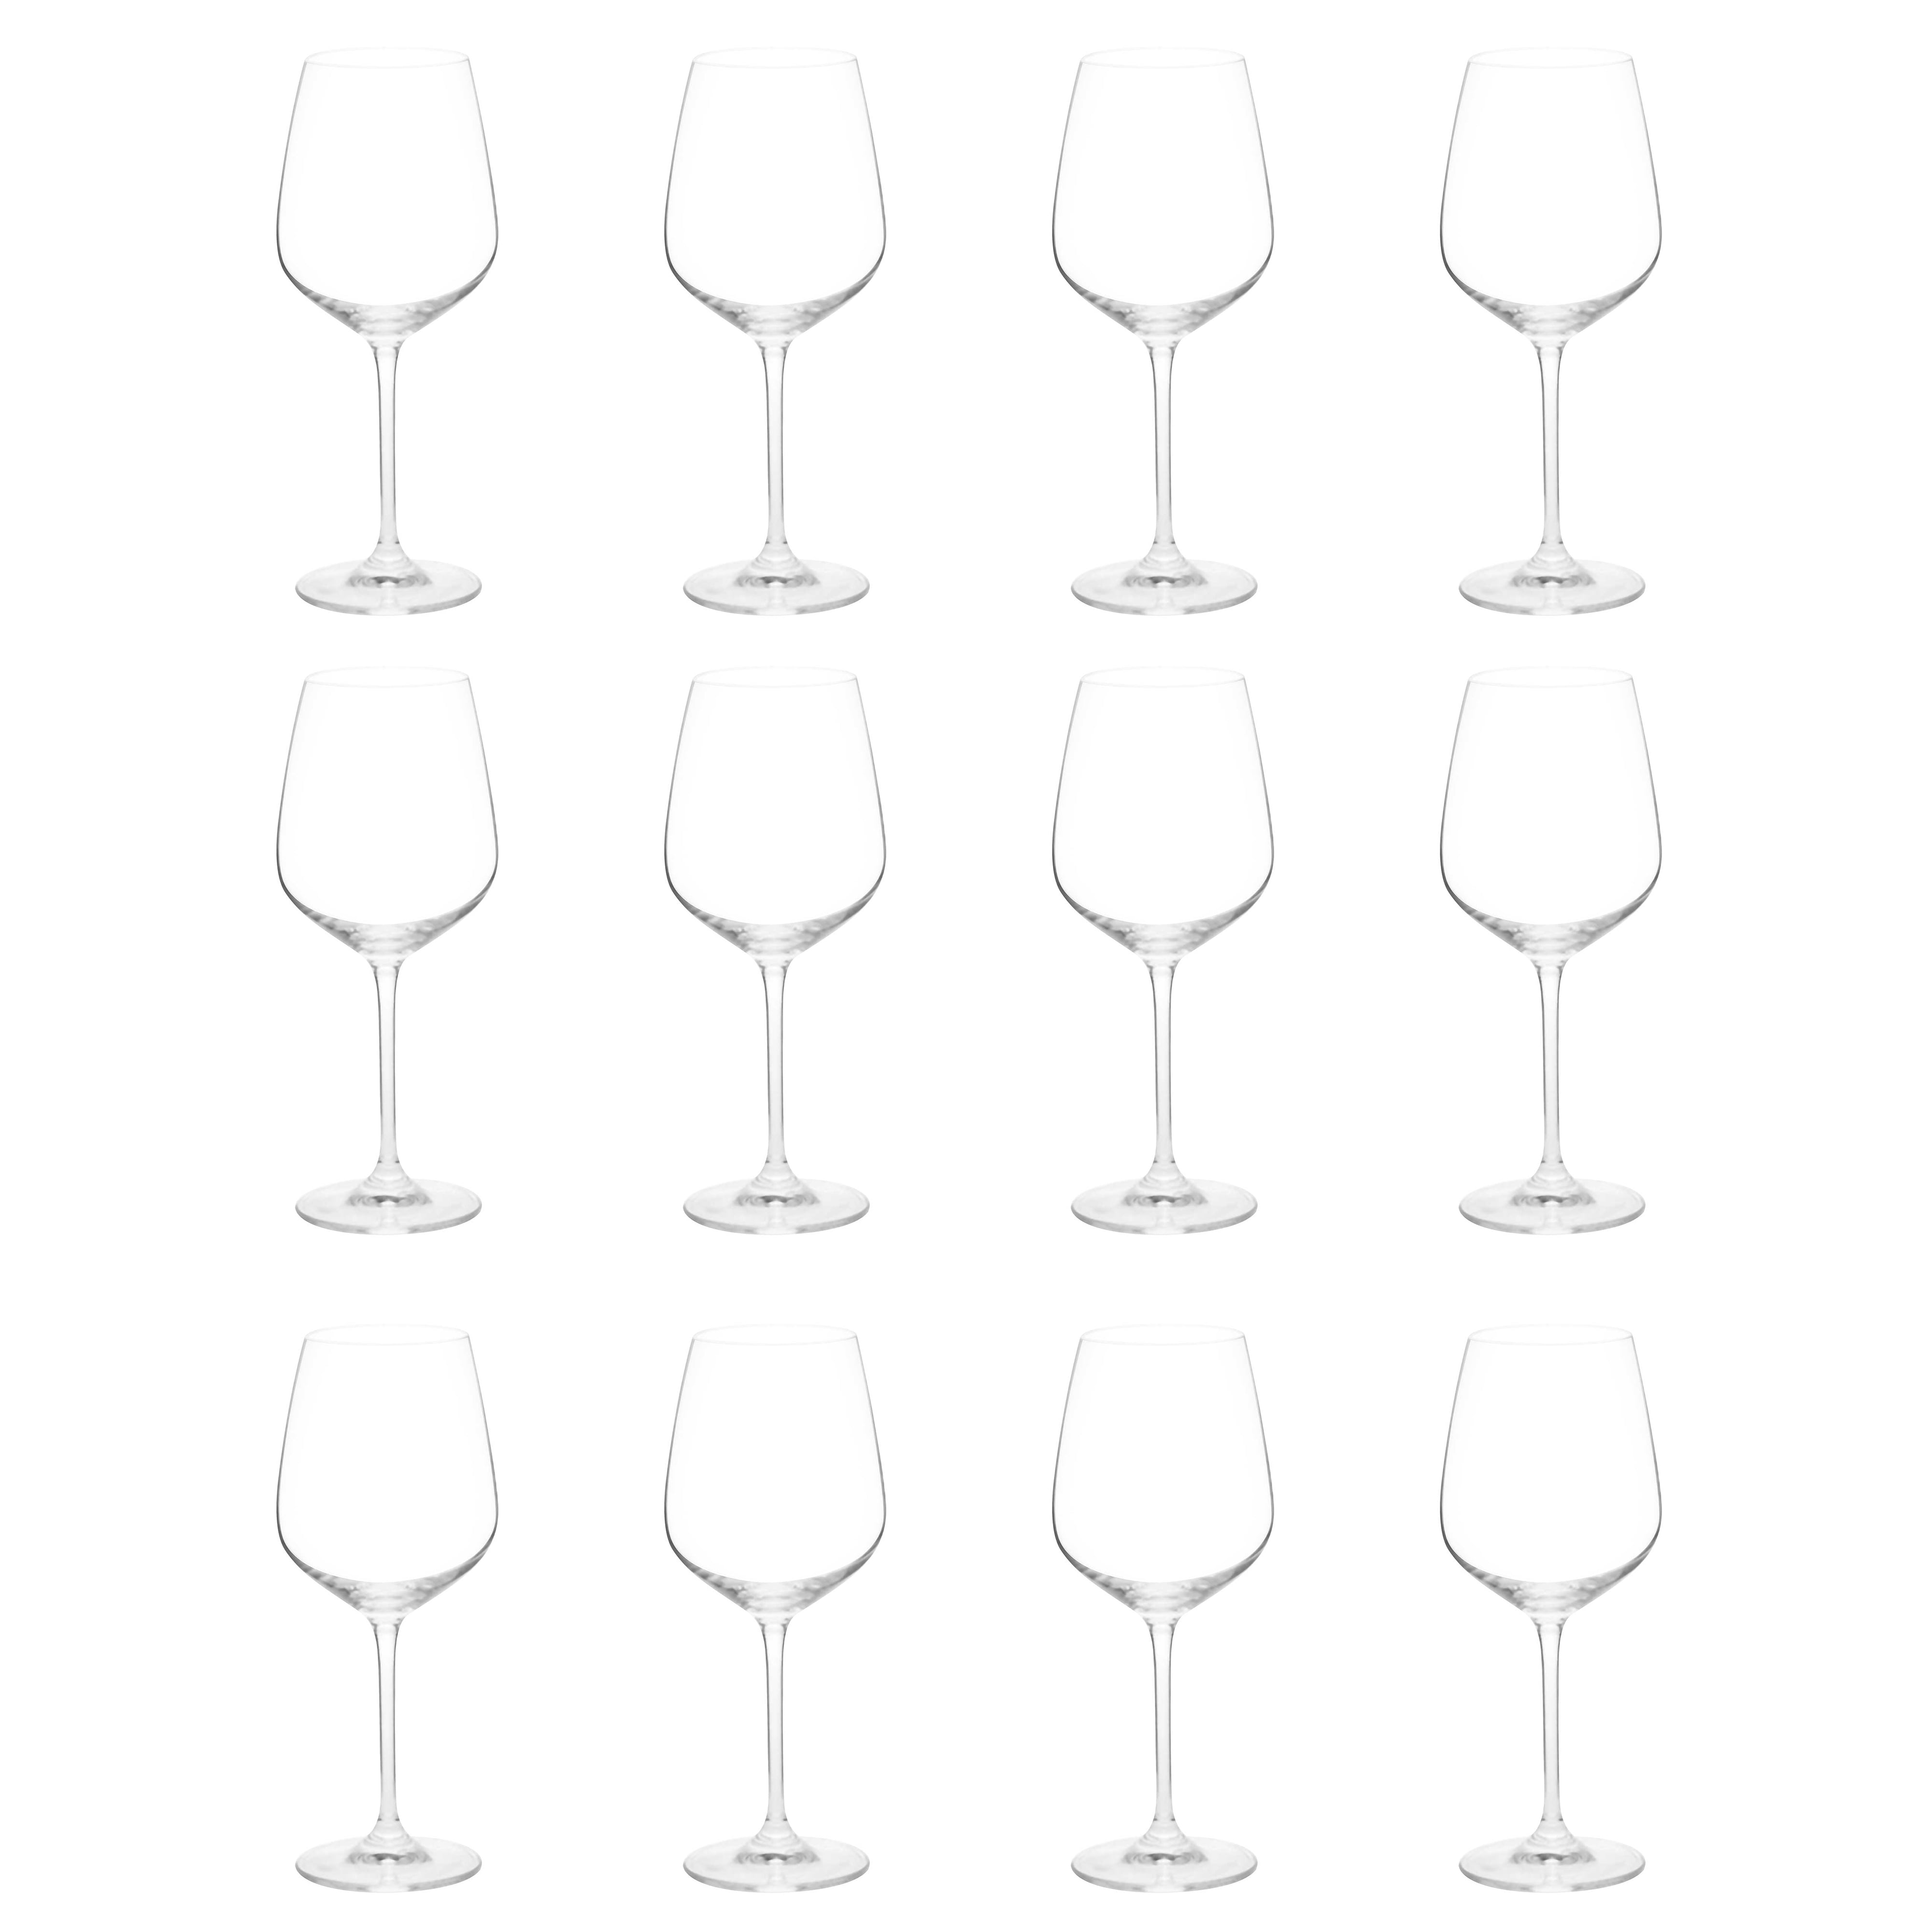 QAPPDA Red Wine Glasses,Crystal Clear Stemware,12 Ounce,Set of 8,Ideal for  Daily Use or Entertaining…See more QAPPDA Red Wine Glasses,Crystal Clear